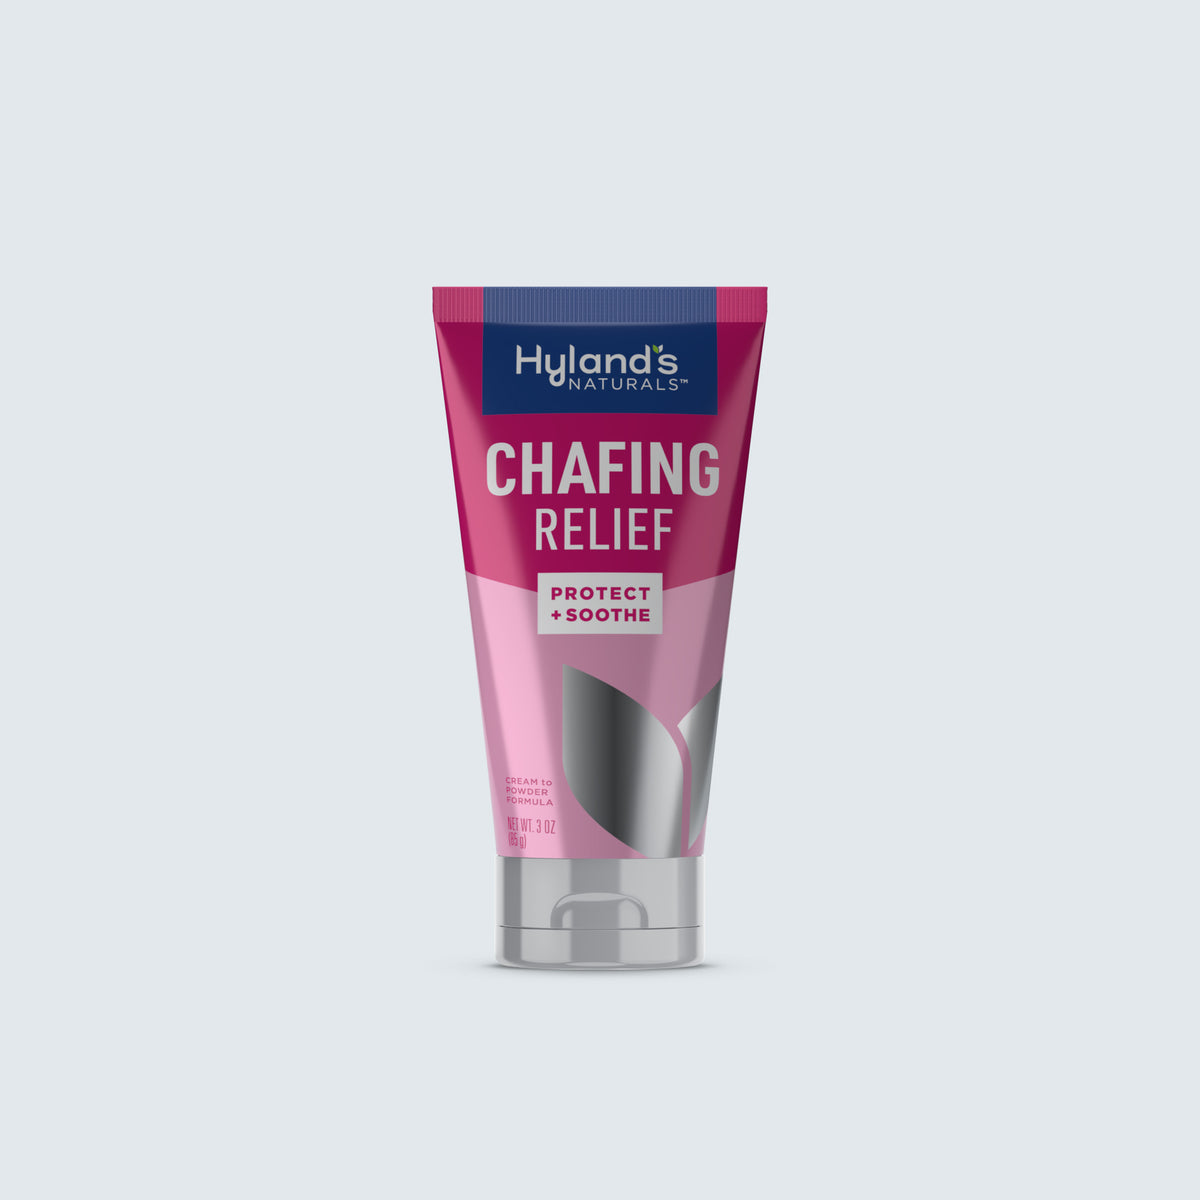 Chafing Relief – Hyland's Naturals